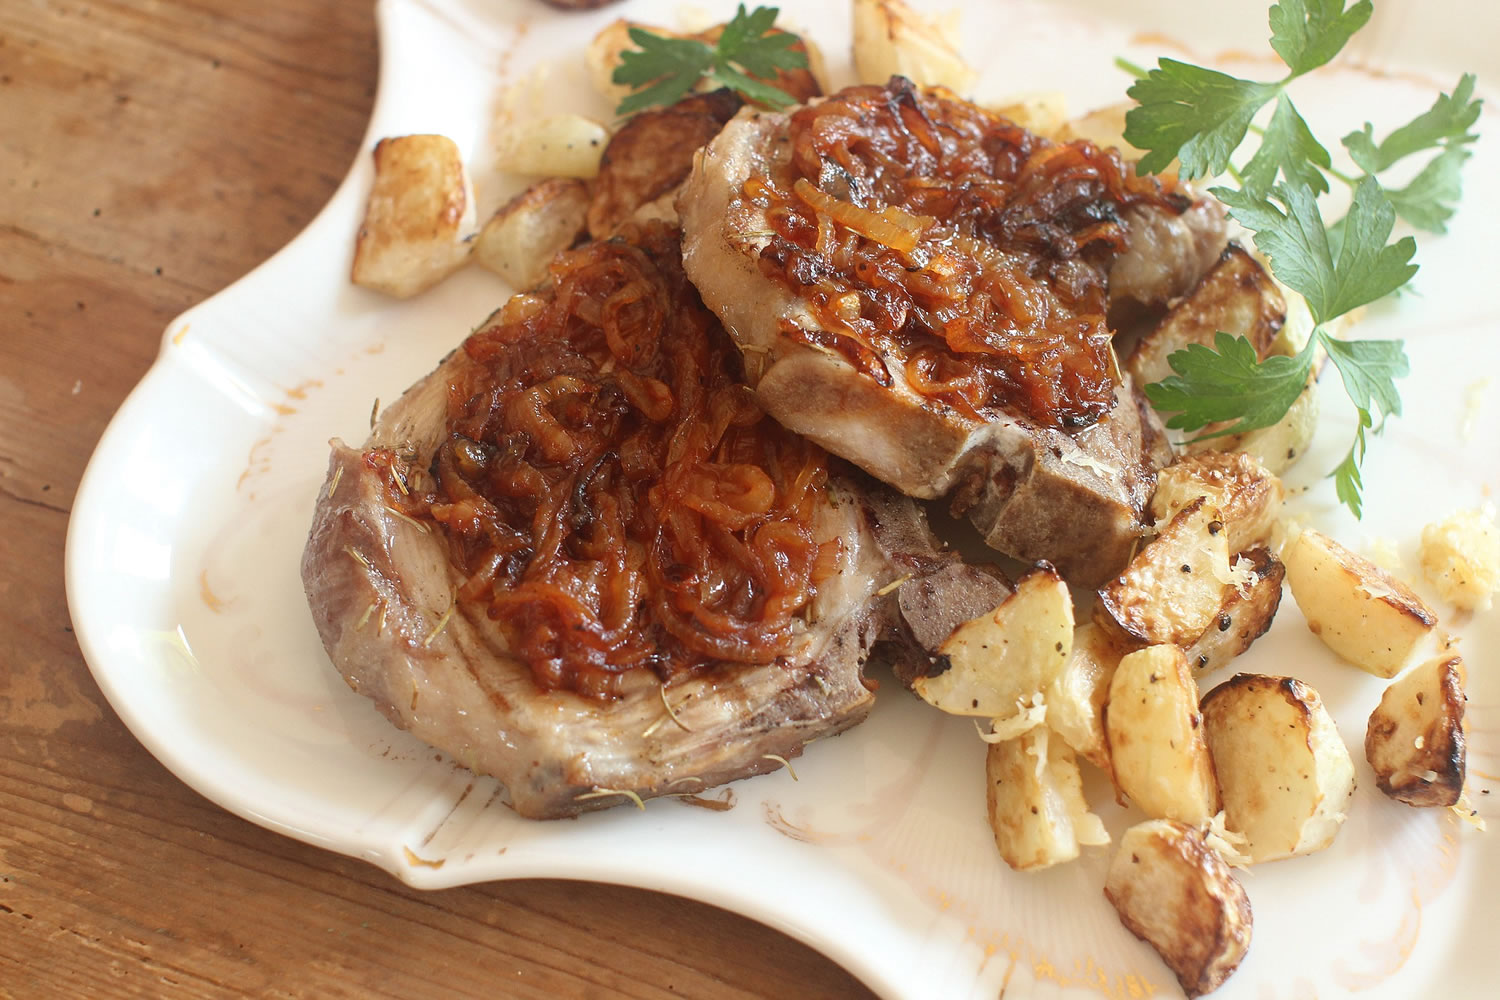 Beer-brined pork chops with barbecued onions